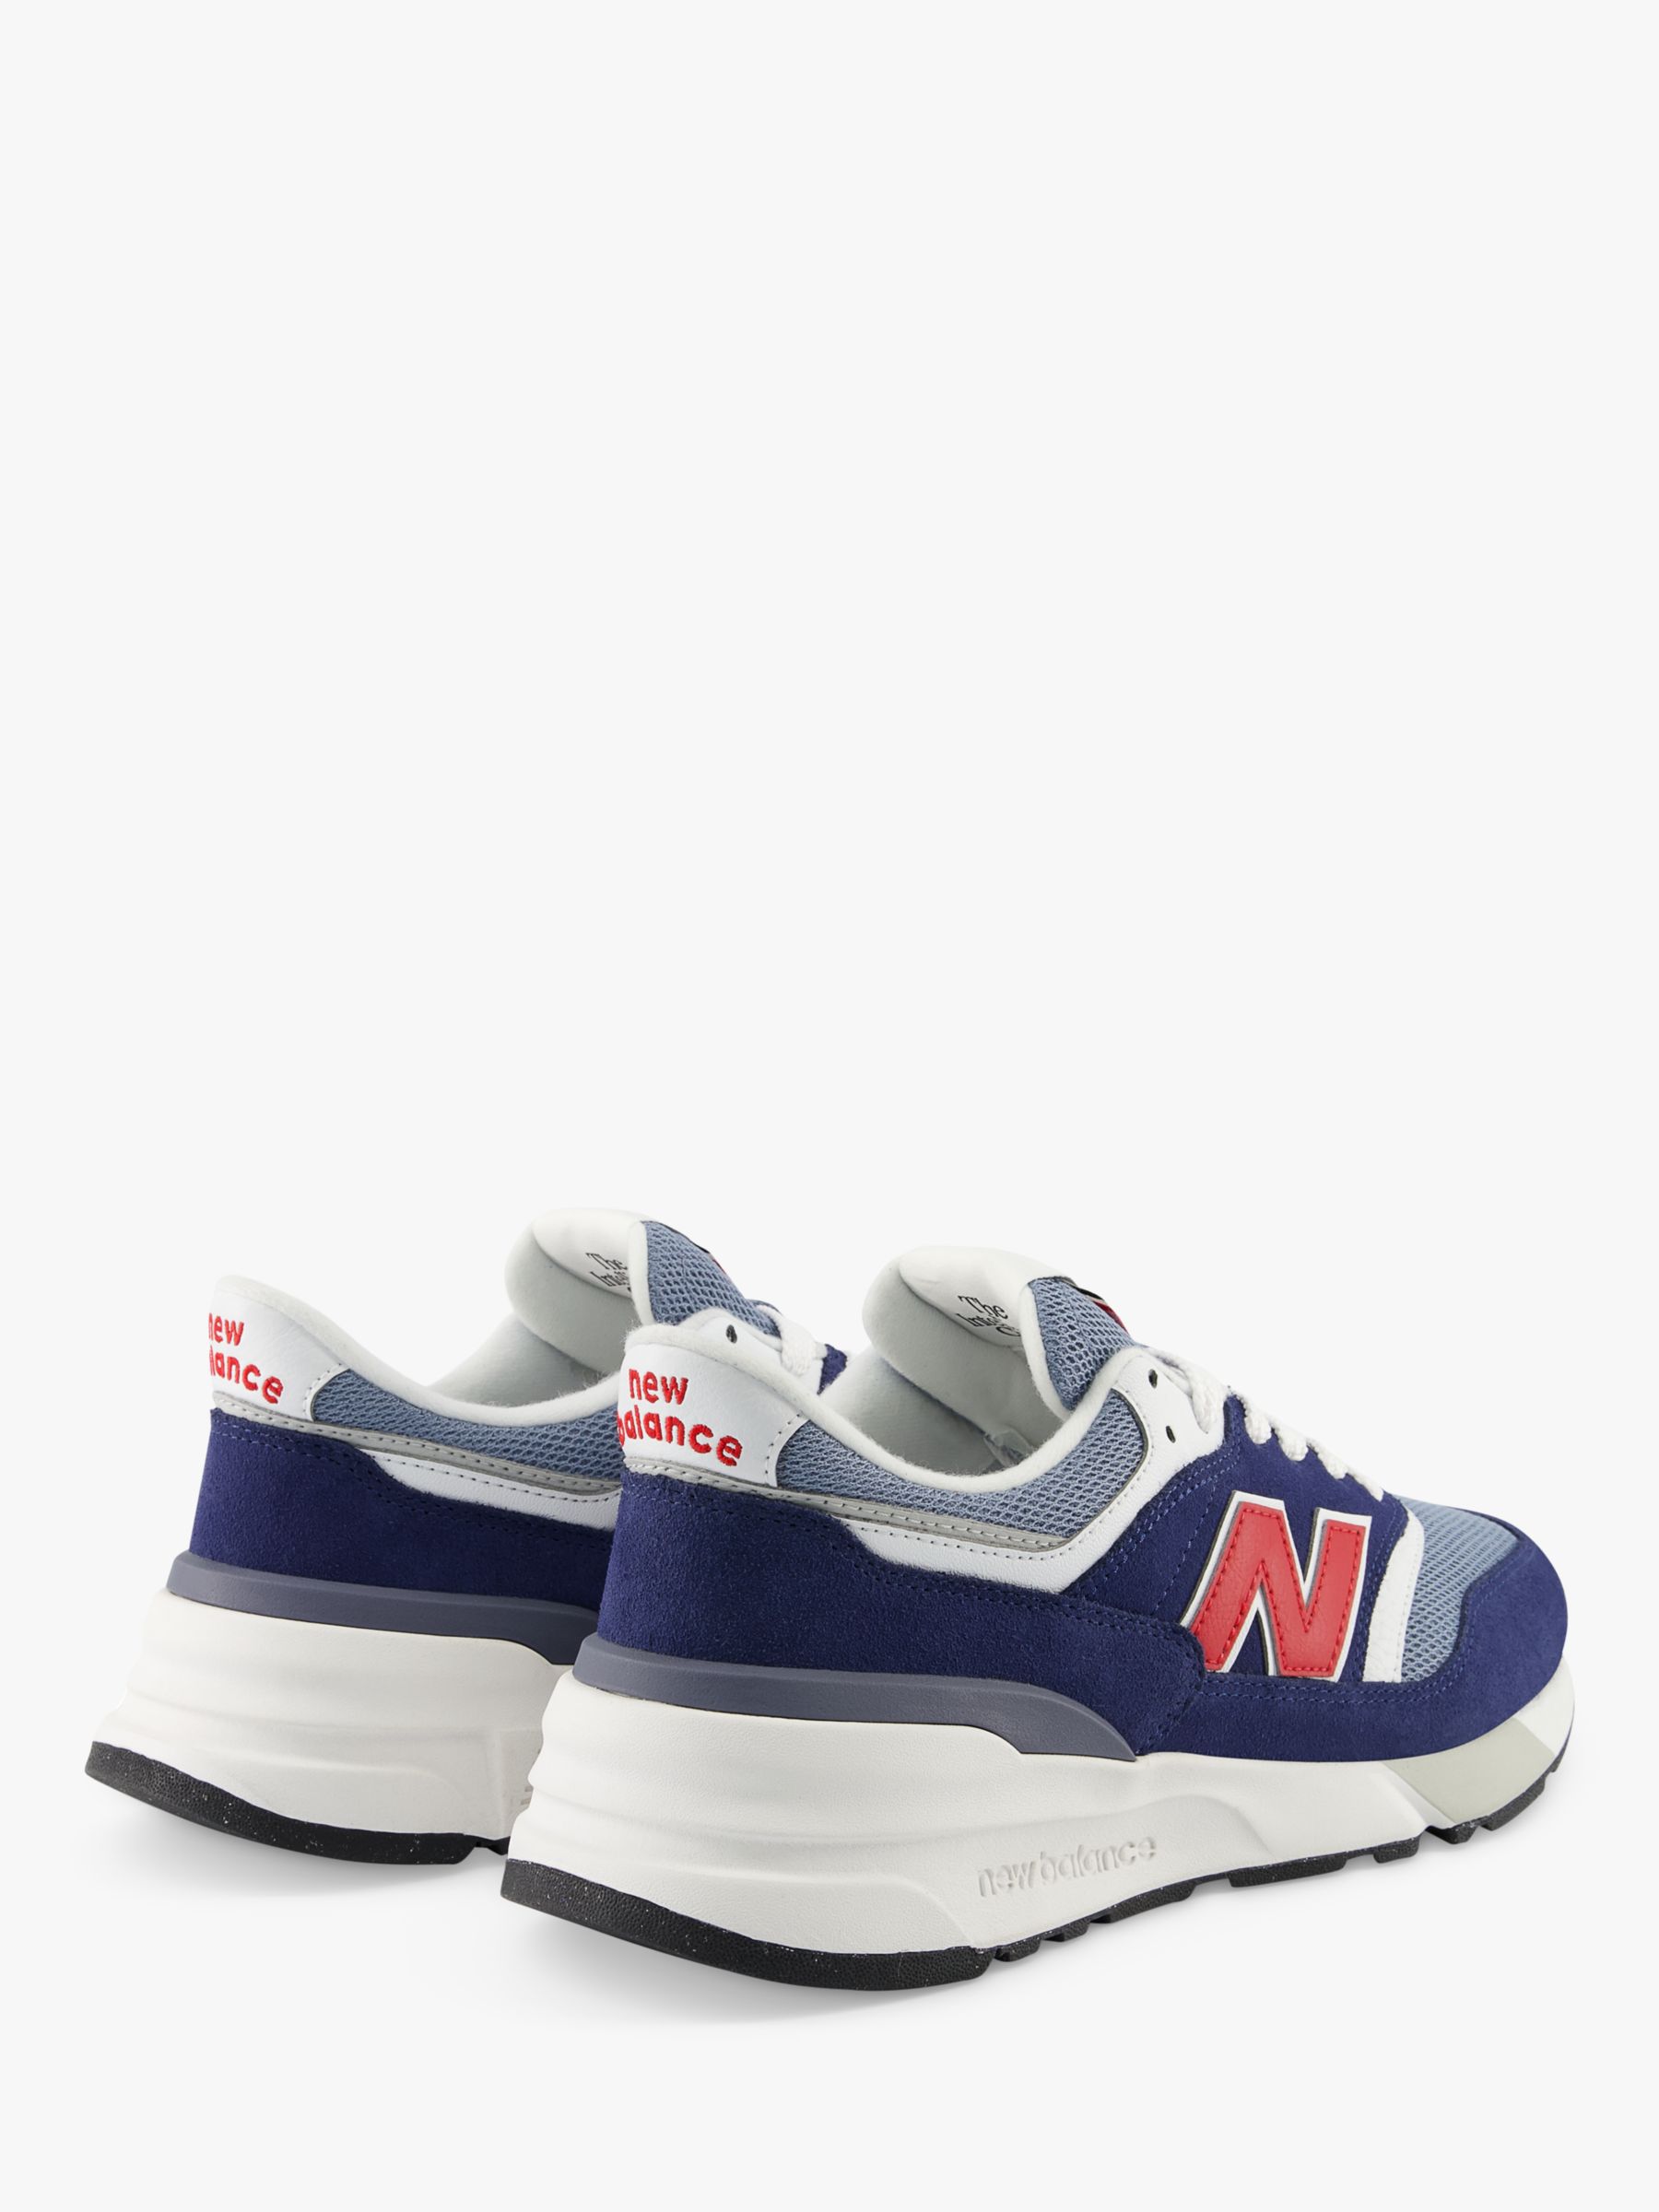 New Balance 997R Suede Mesh Trainers, Navy/Multi, 8